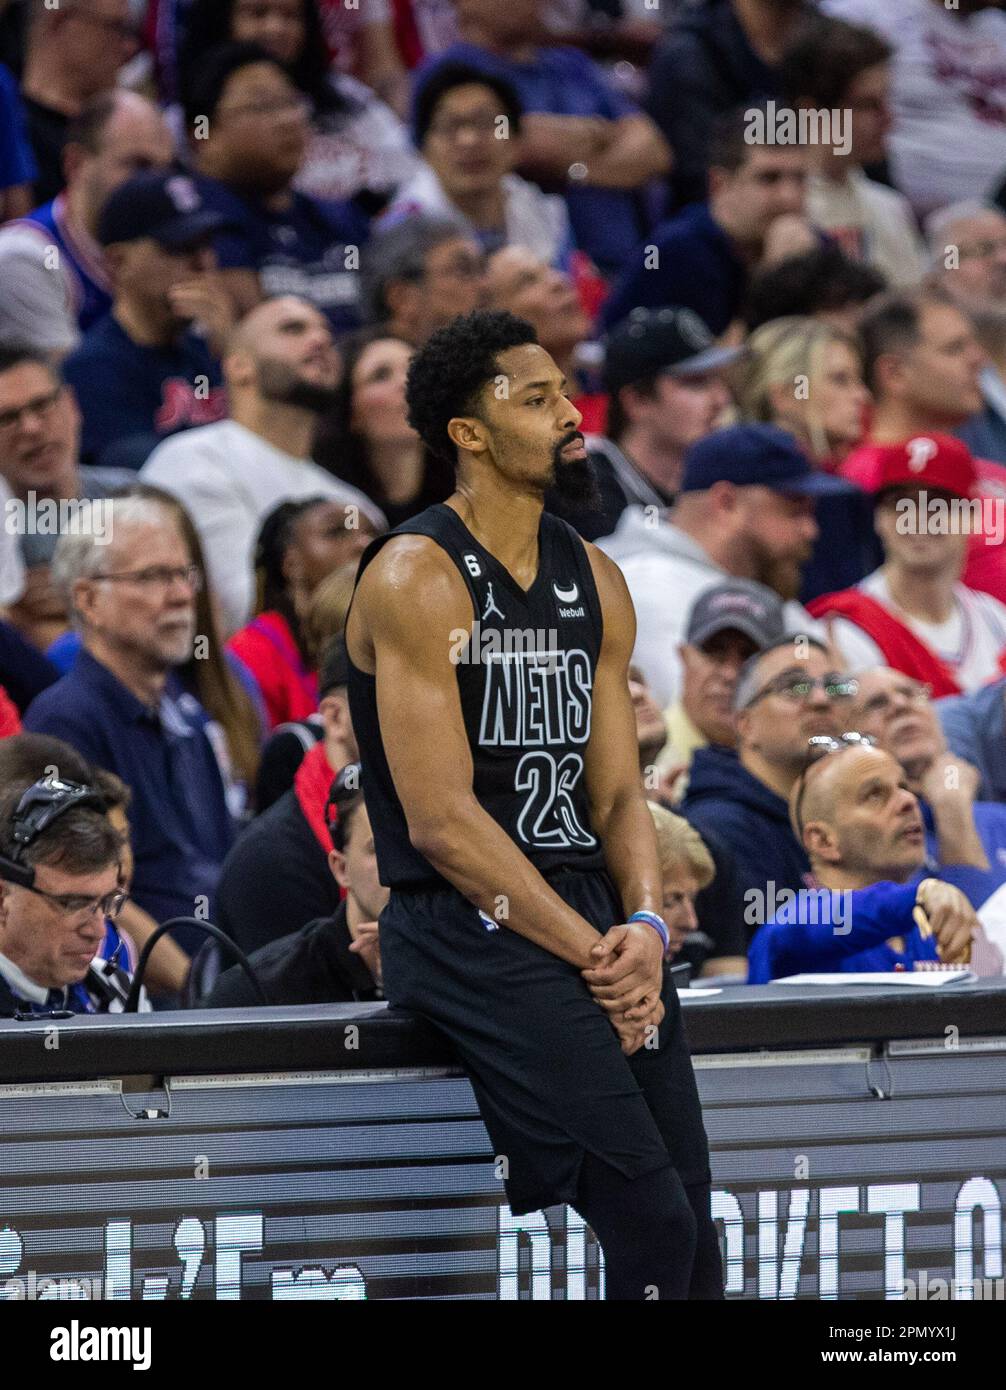 Philadelphia, USA, April 15th 2023: Spencer Dinwiddie (26 Nets) in action  during the National Basketball Association playoff game between  Philadelphia Sixers and Brooklyn Nets at Wells Fargo Center in  Philadelphia, USA (Georgia